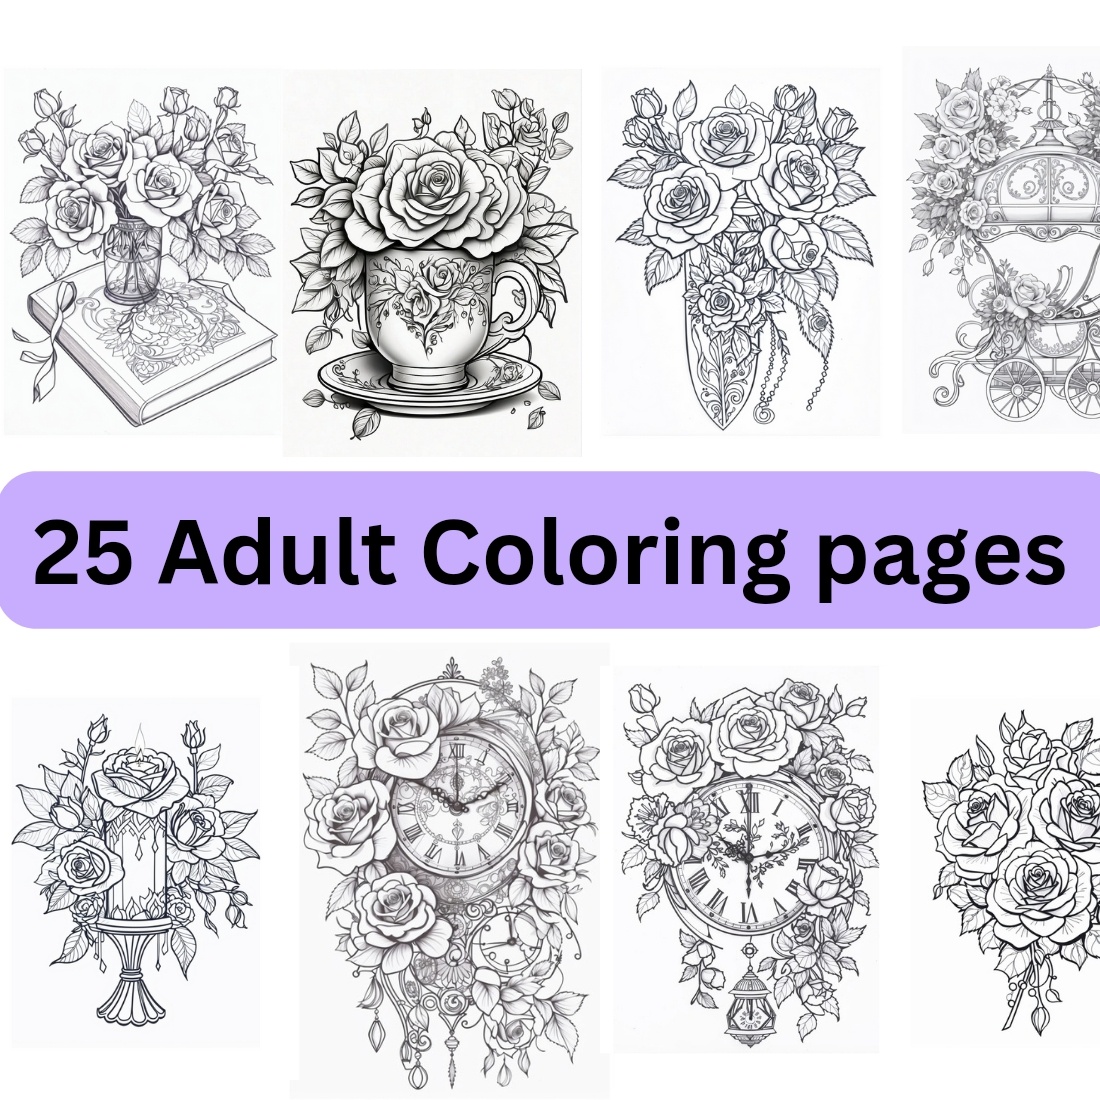 Printable rose designs adult coloring pages coloring pages for adults